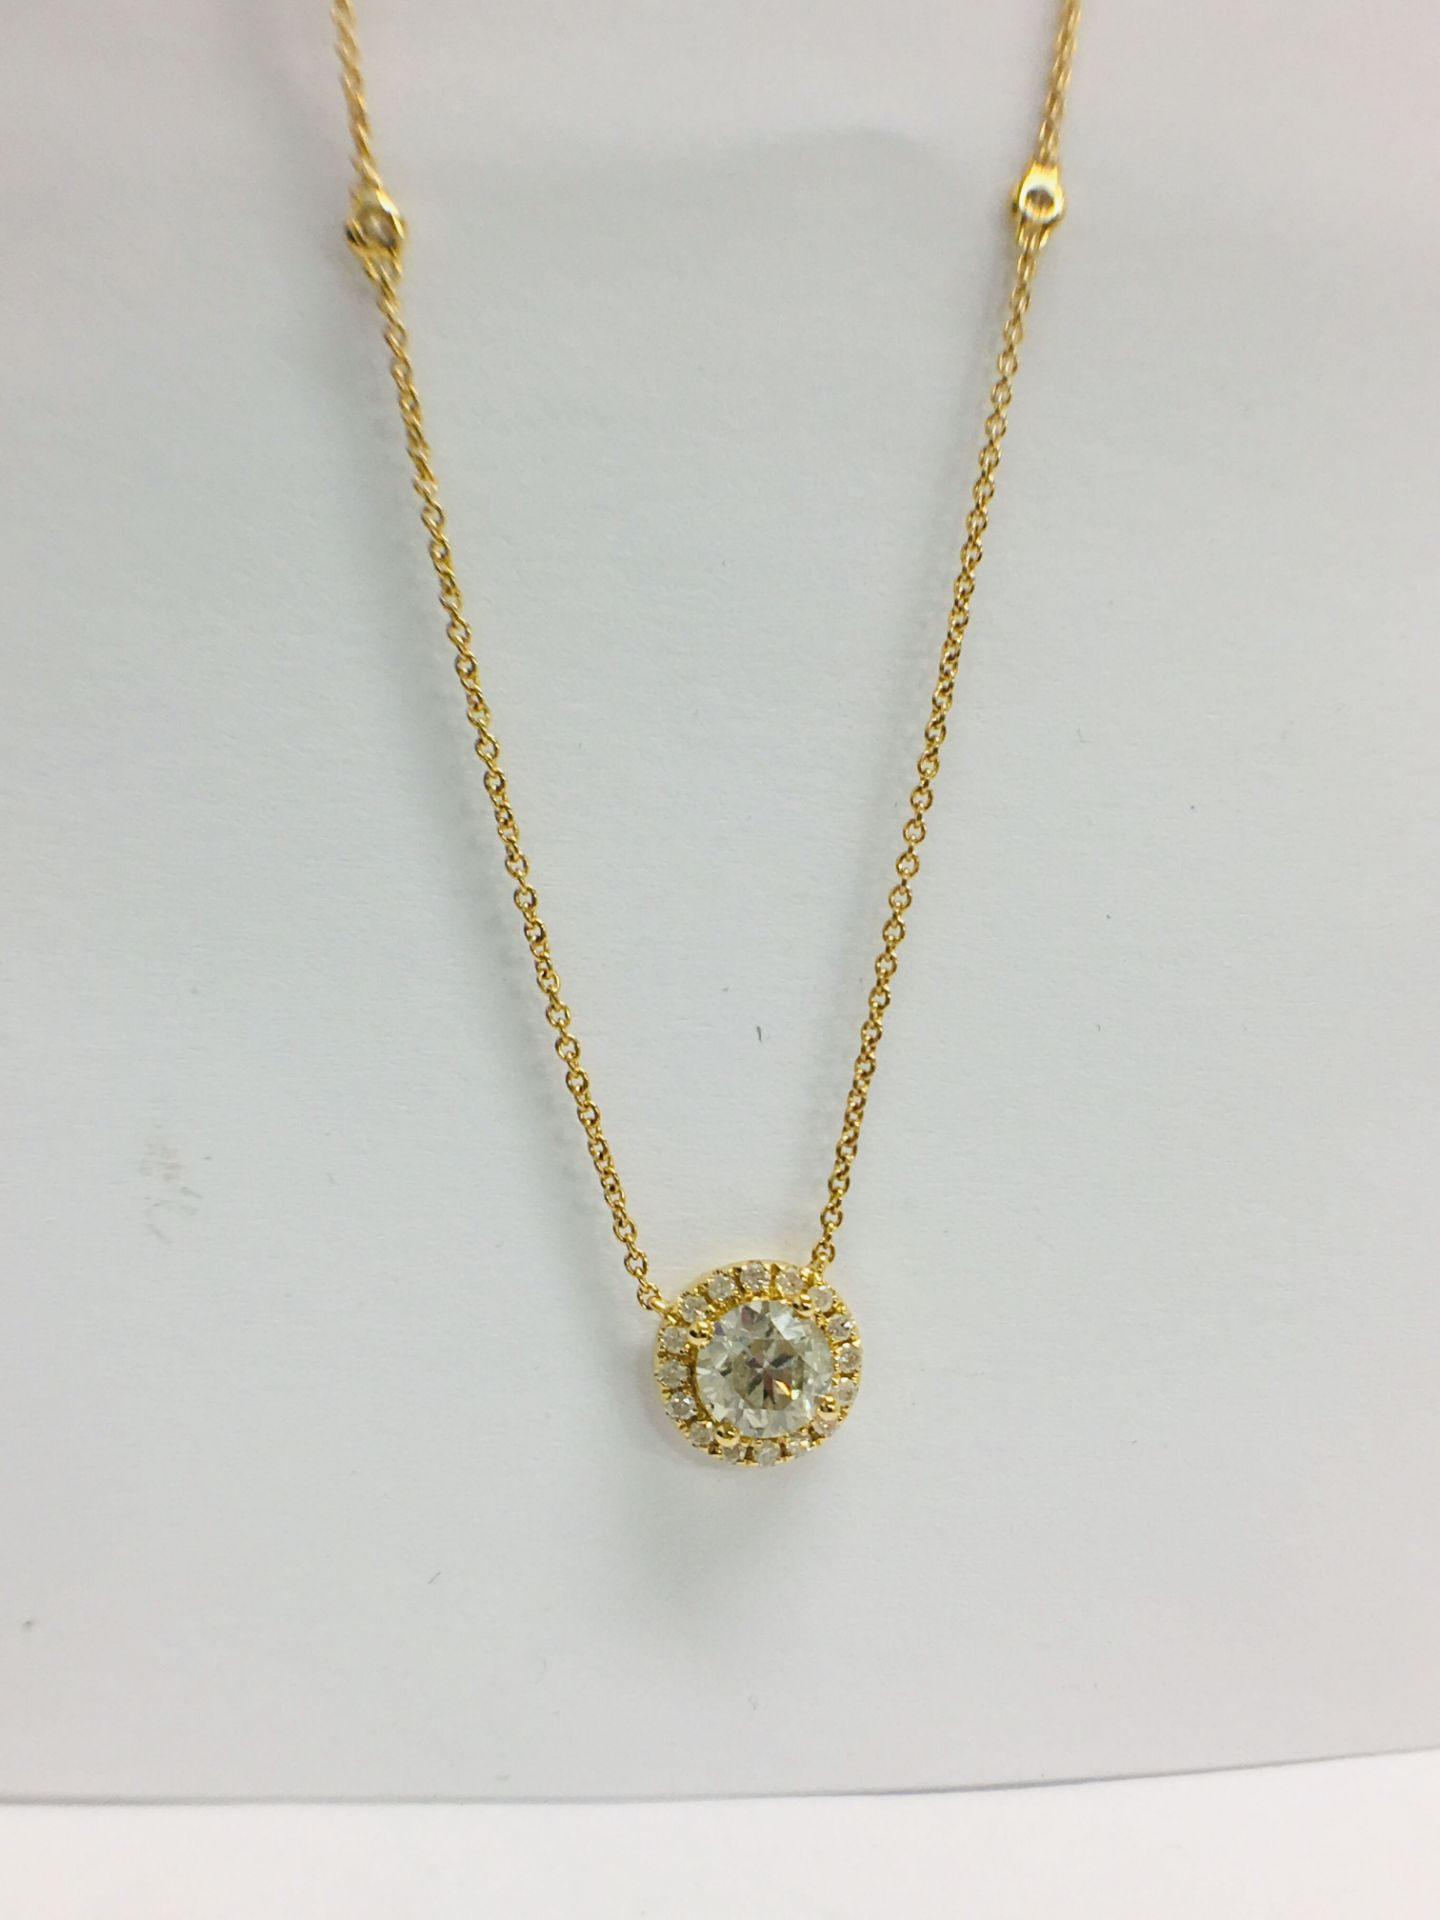 18ct Yellow Gold Diamond Necklace - Image 5 of 7